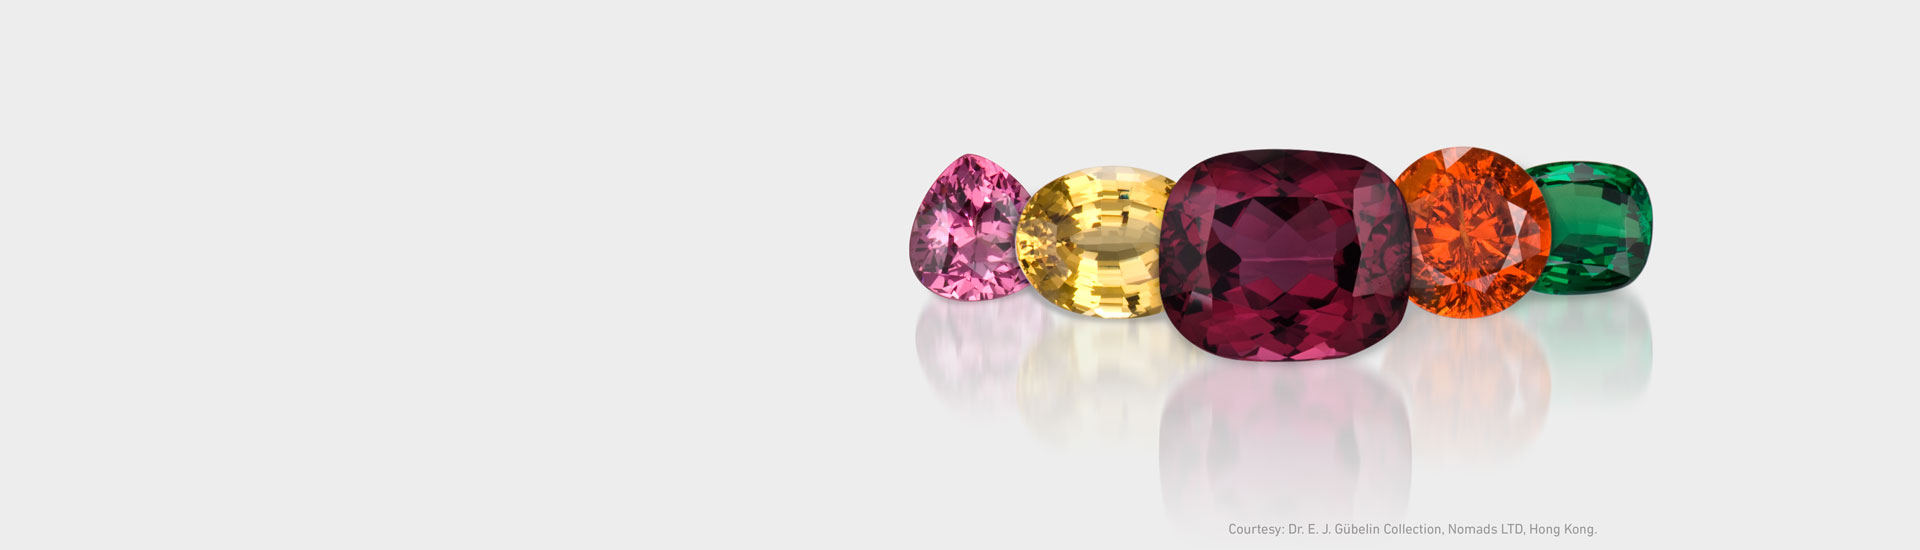 Fun Facts About Garnet: January's Birthstone